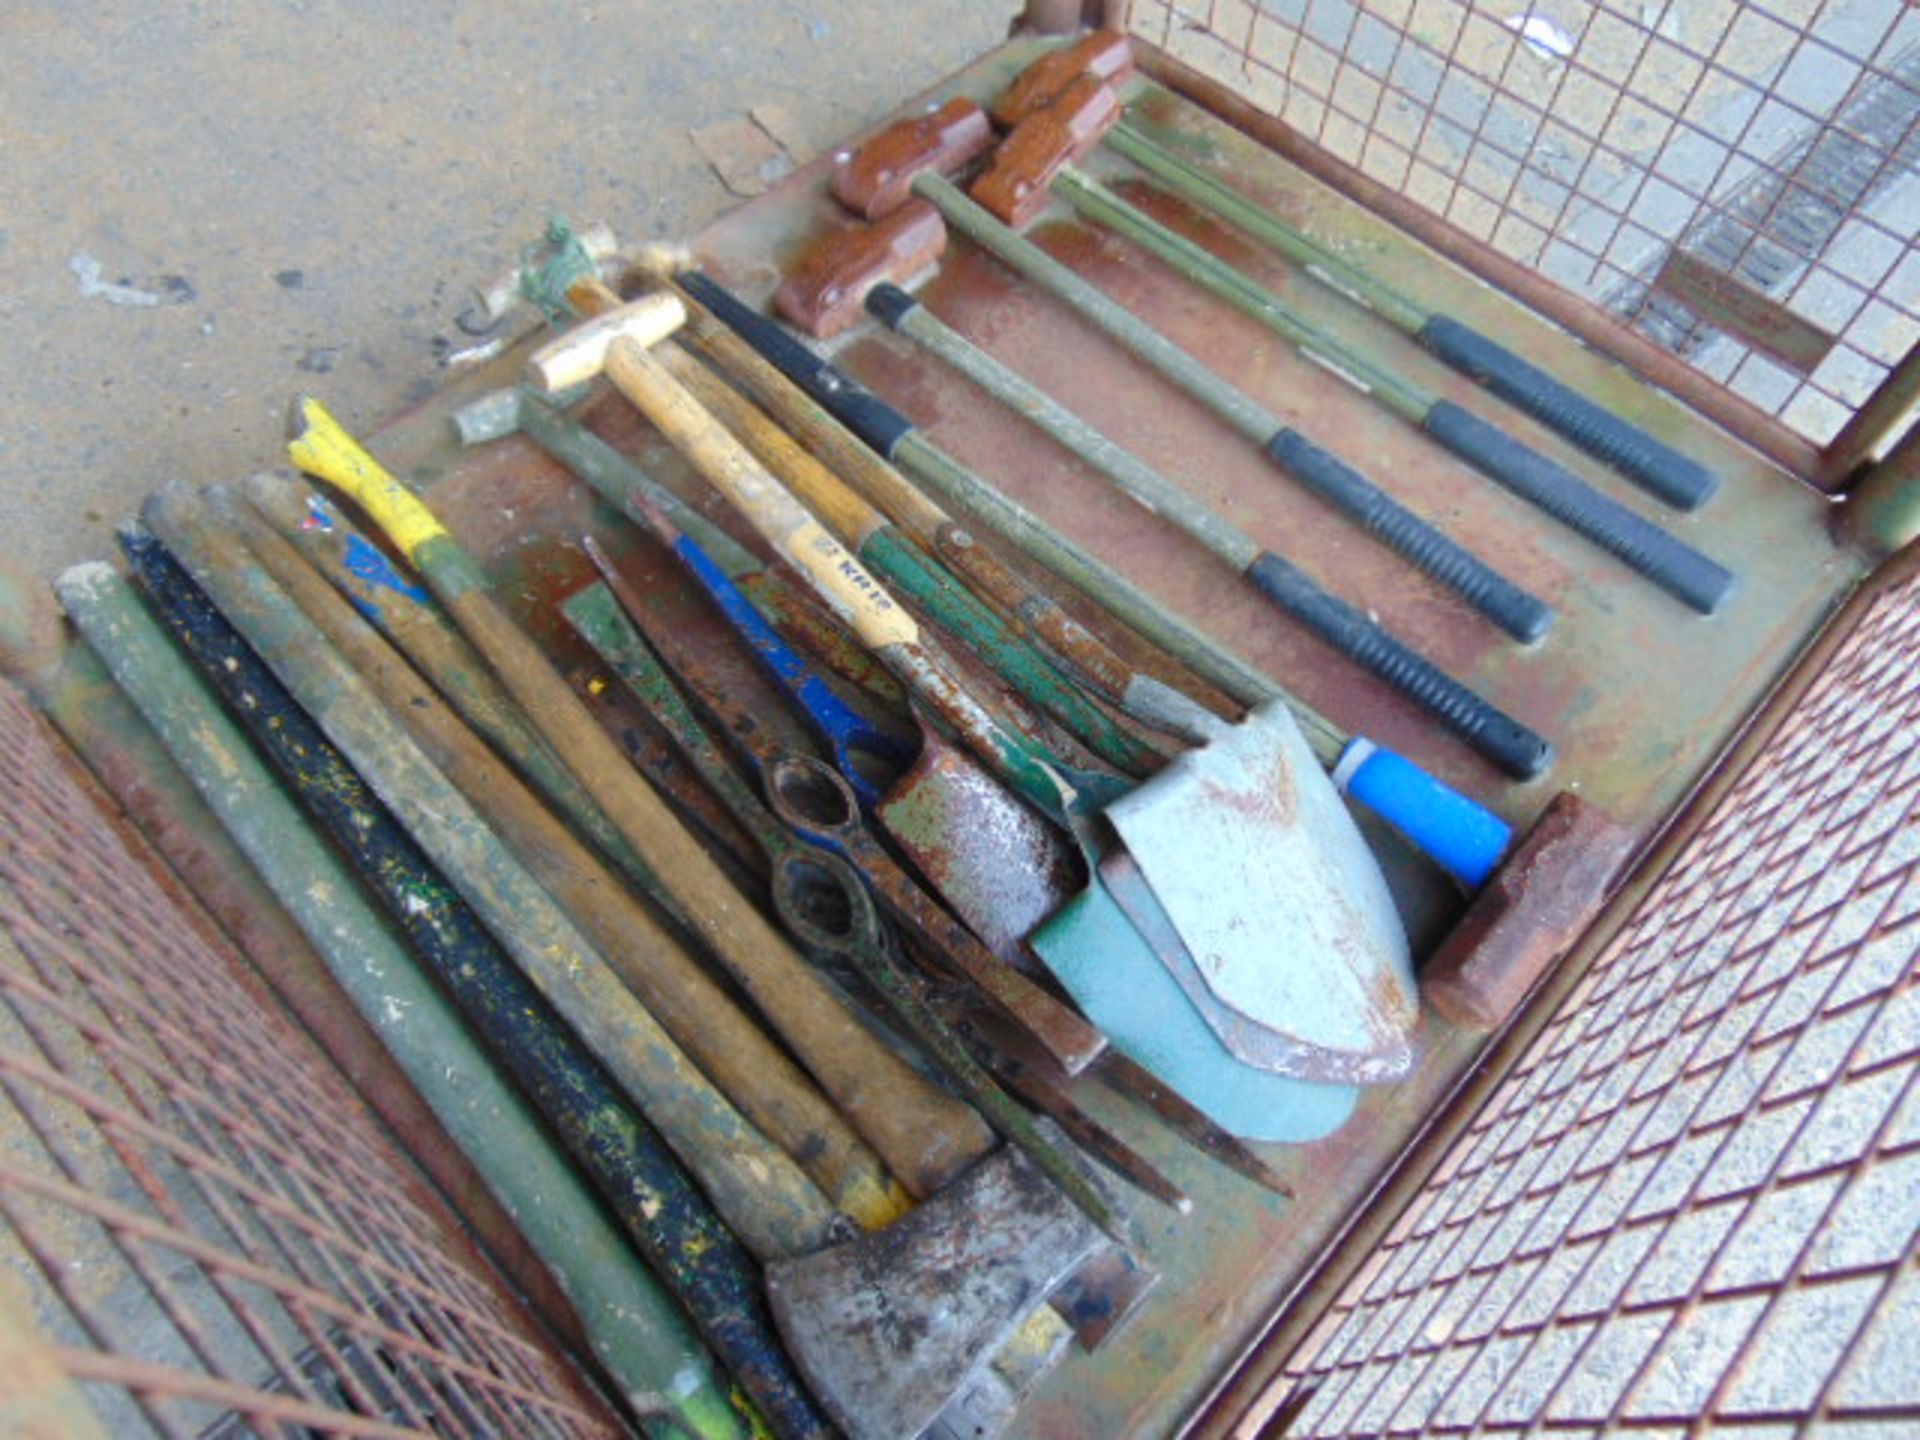 1 x Stillage British Army Axes, Sledge Hammers, T handle Shovels, Picks and helves (20 items) - Image 5 of 5